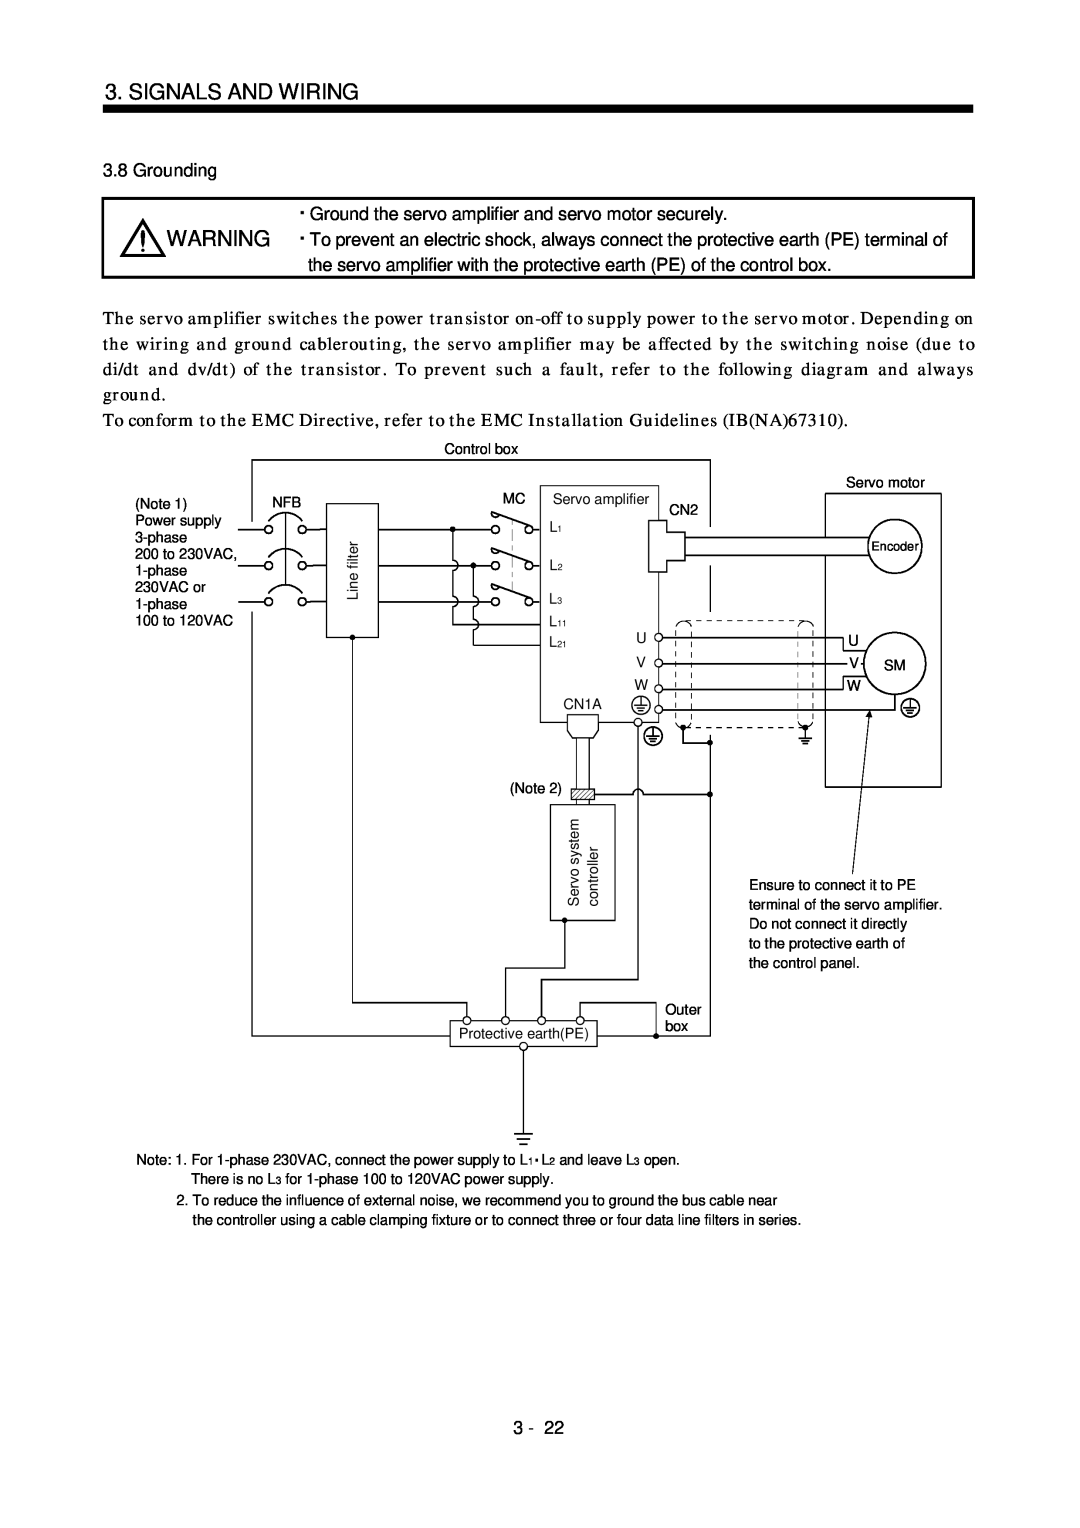 Bose MR-J2S- B instruction manual Grounding, Signals And Wiring 